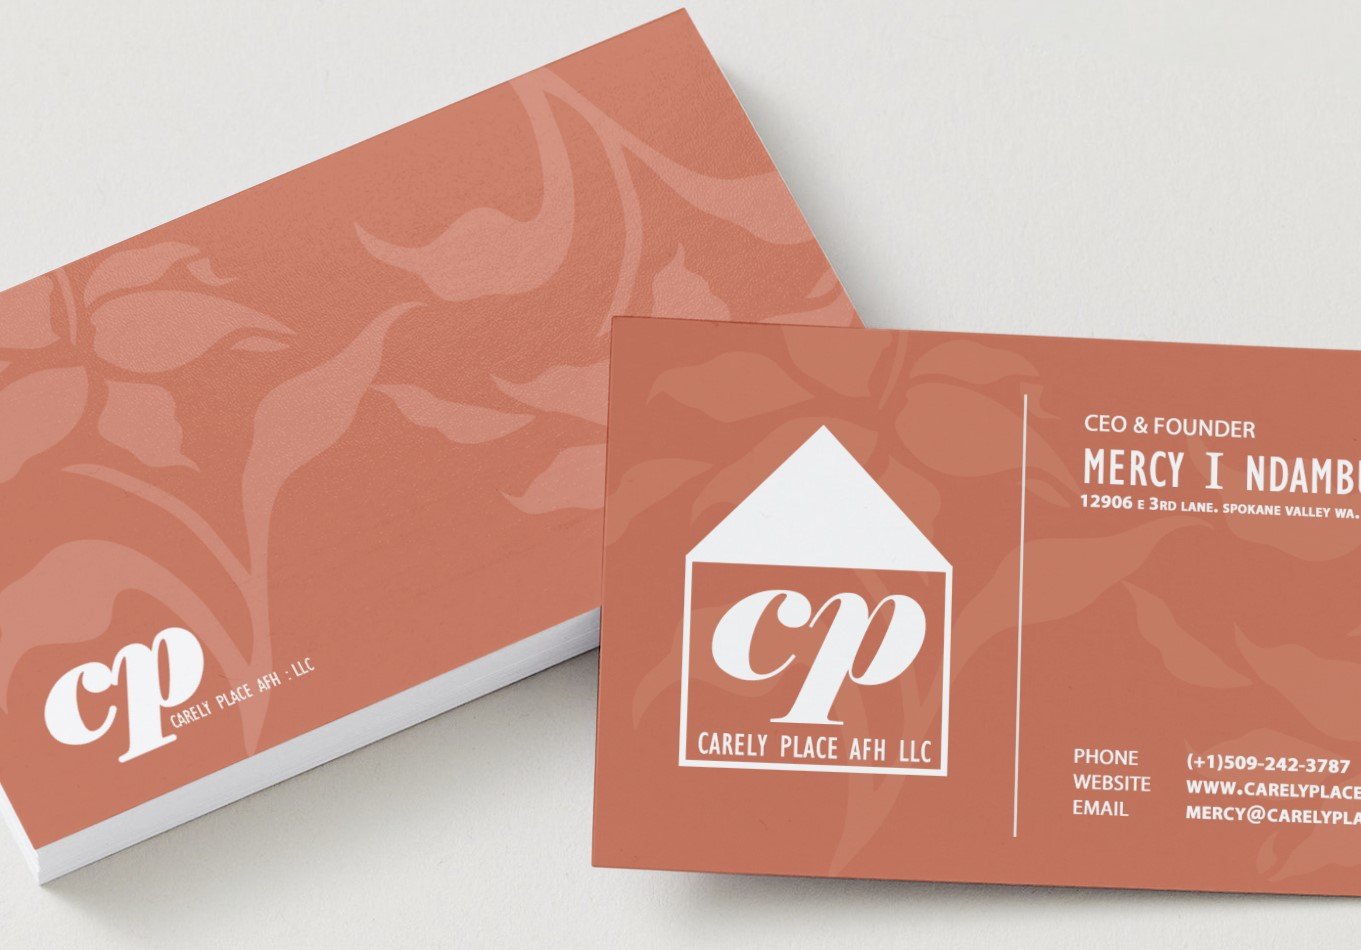 21051401 - Carely Place AFH - Business Cards  - Front & Back - Close Up.jpg